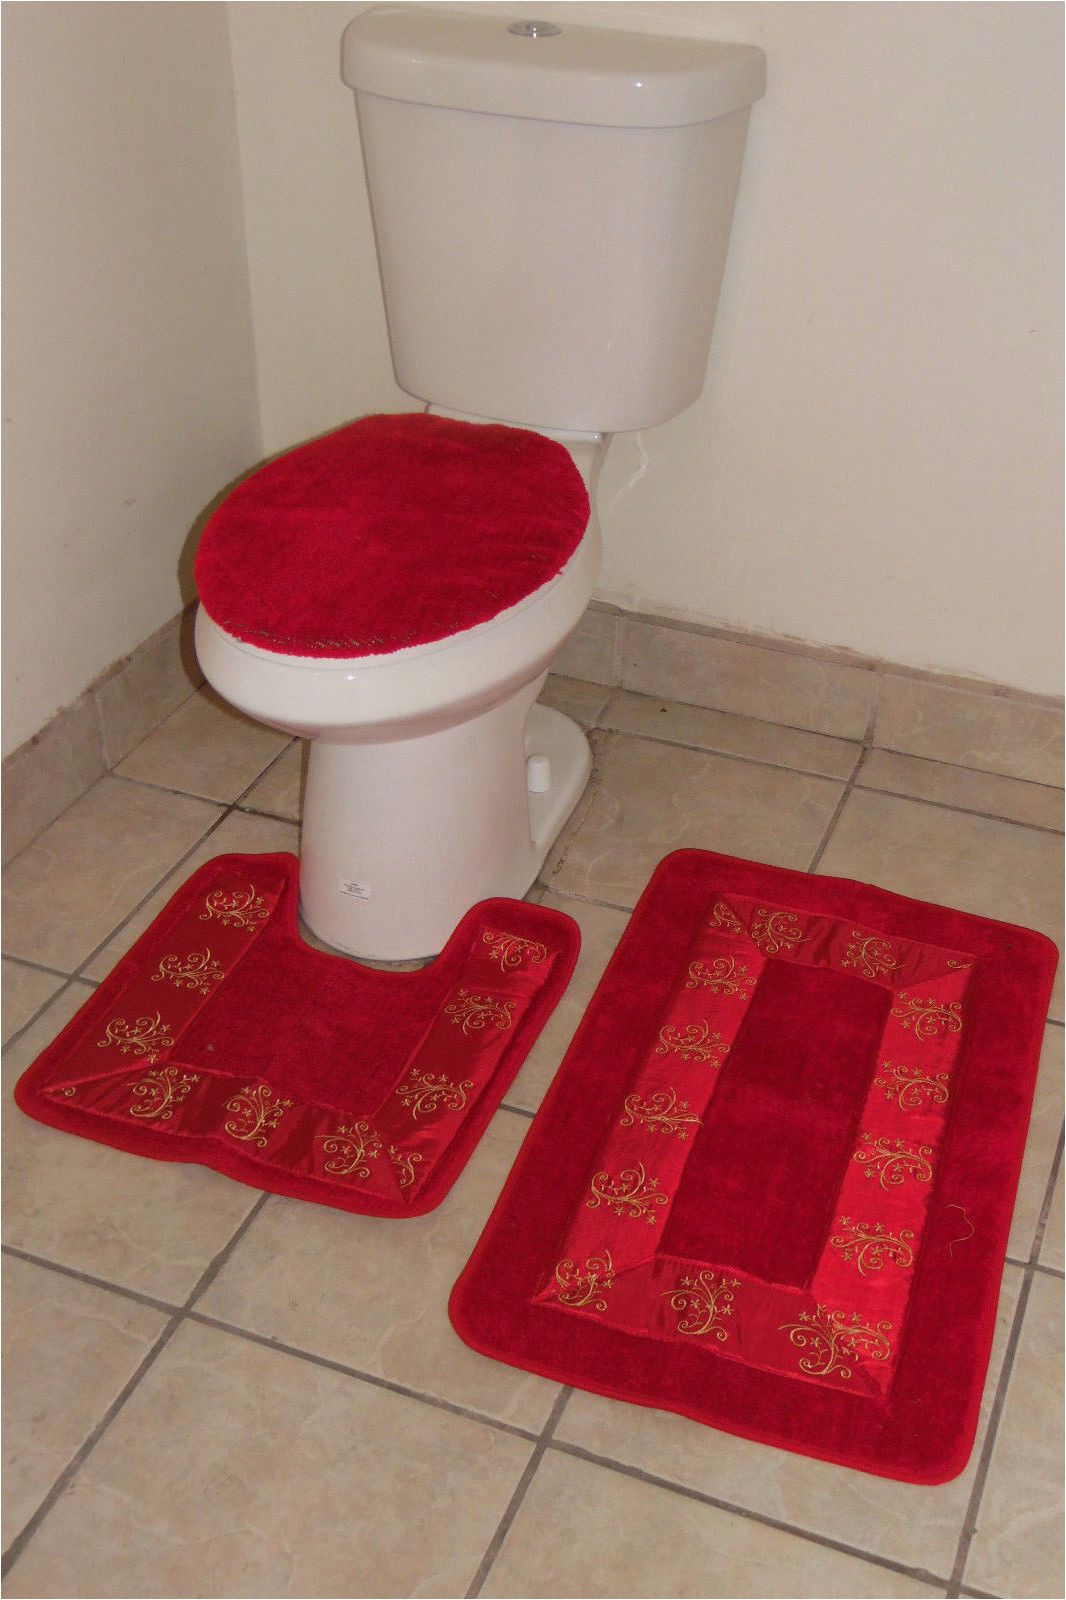 Bright Red Bath Rugs Bathmats Rugs and toilet Covers 3pc 5 Red Bathroom